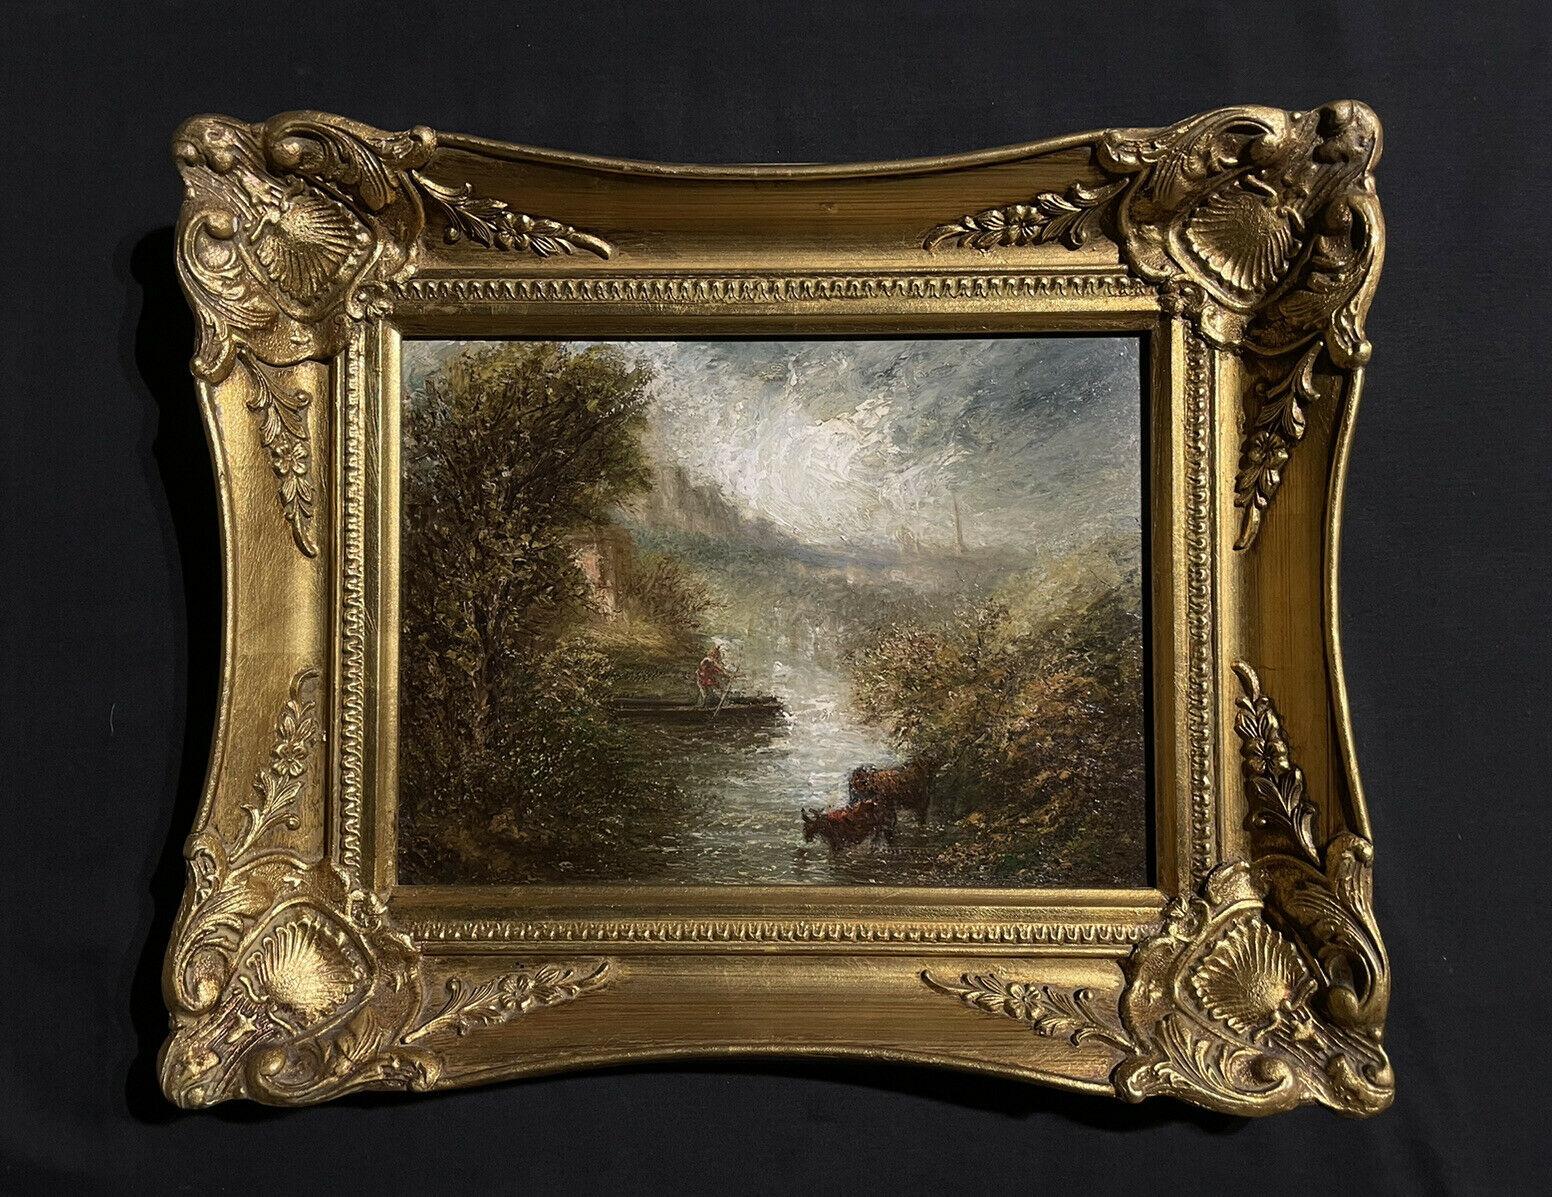 Follower of John Constable, Antique English Oil Figure Stormy Lake in Boat - Black Landscape Painting by English 19th